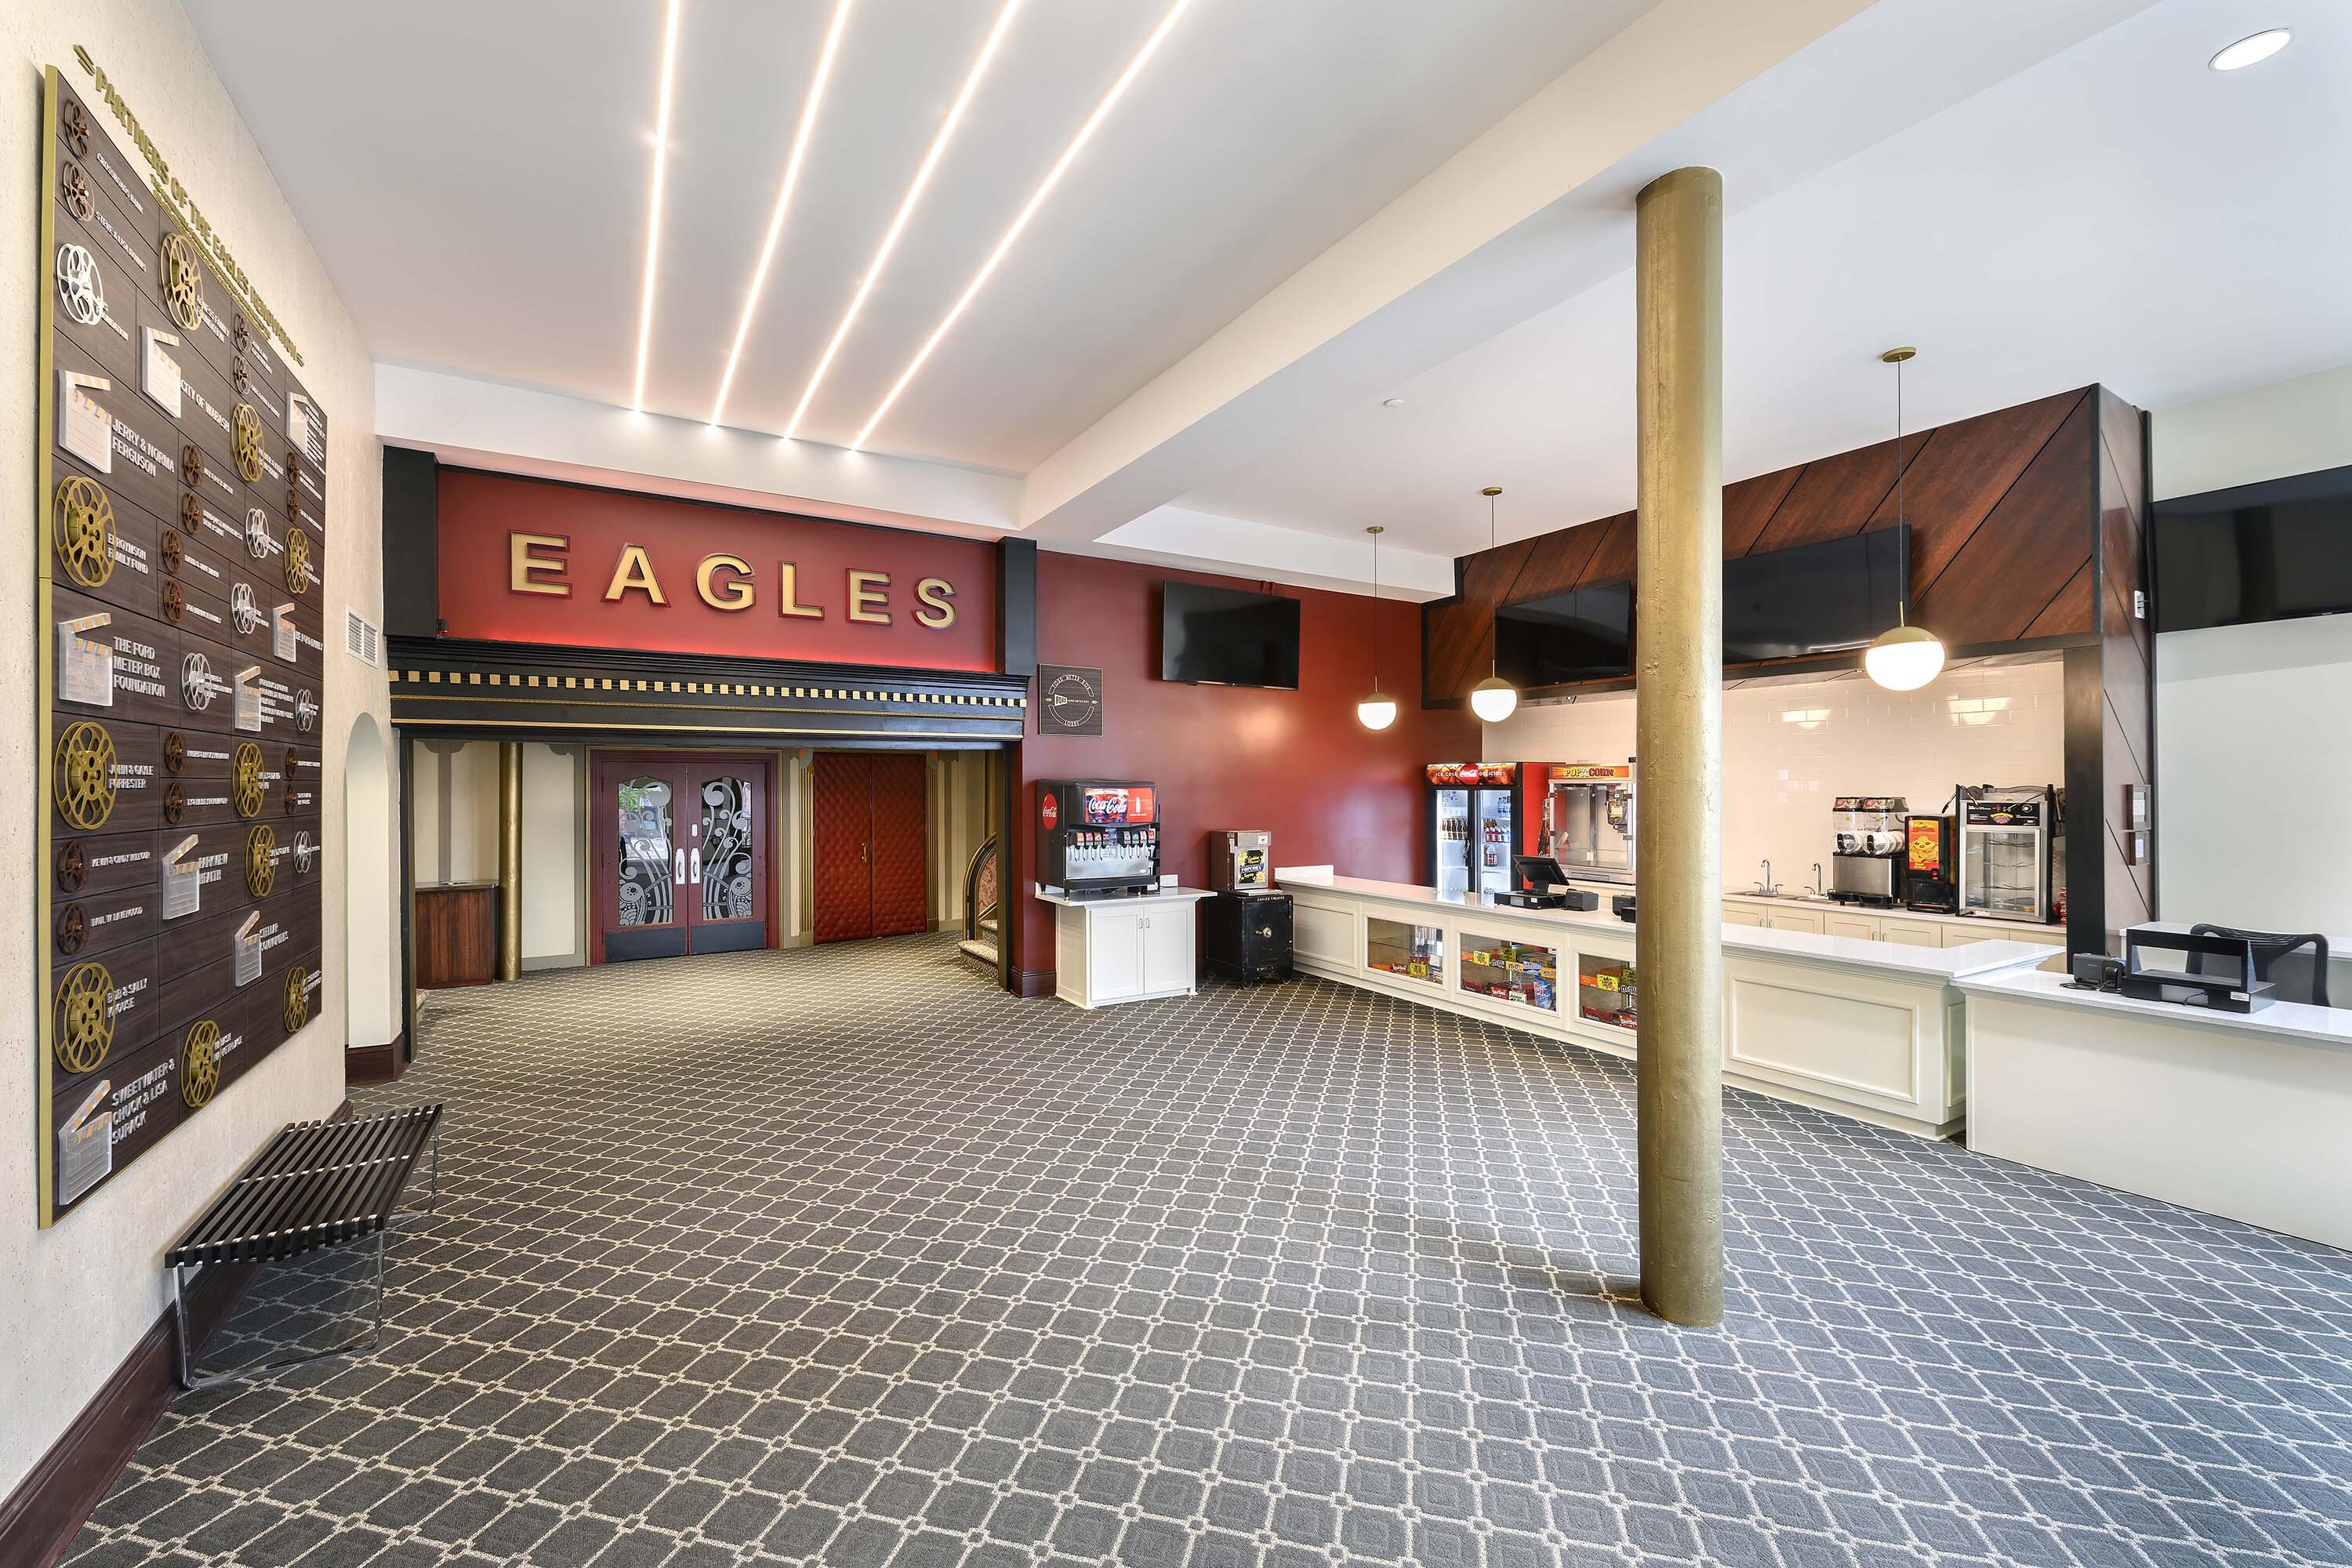 The lobby of the Eagles Theatre.